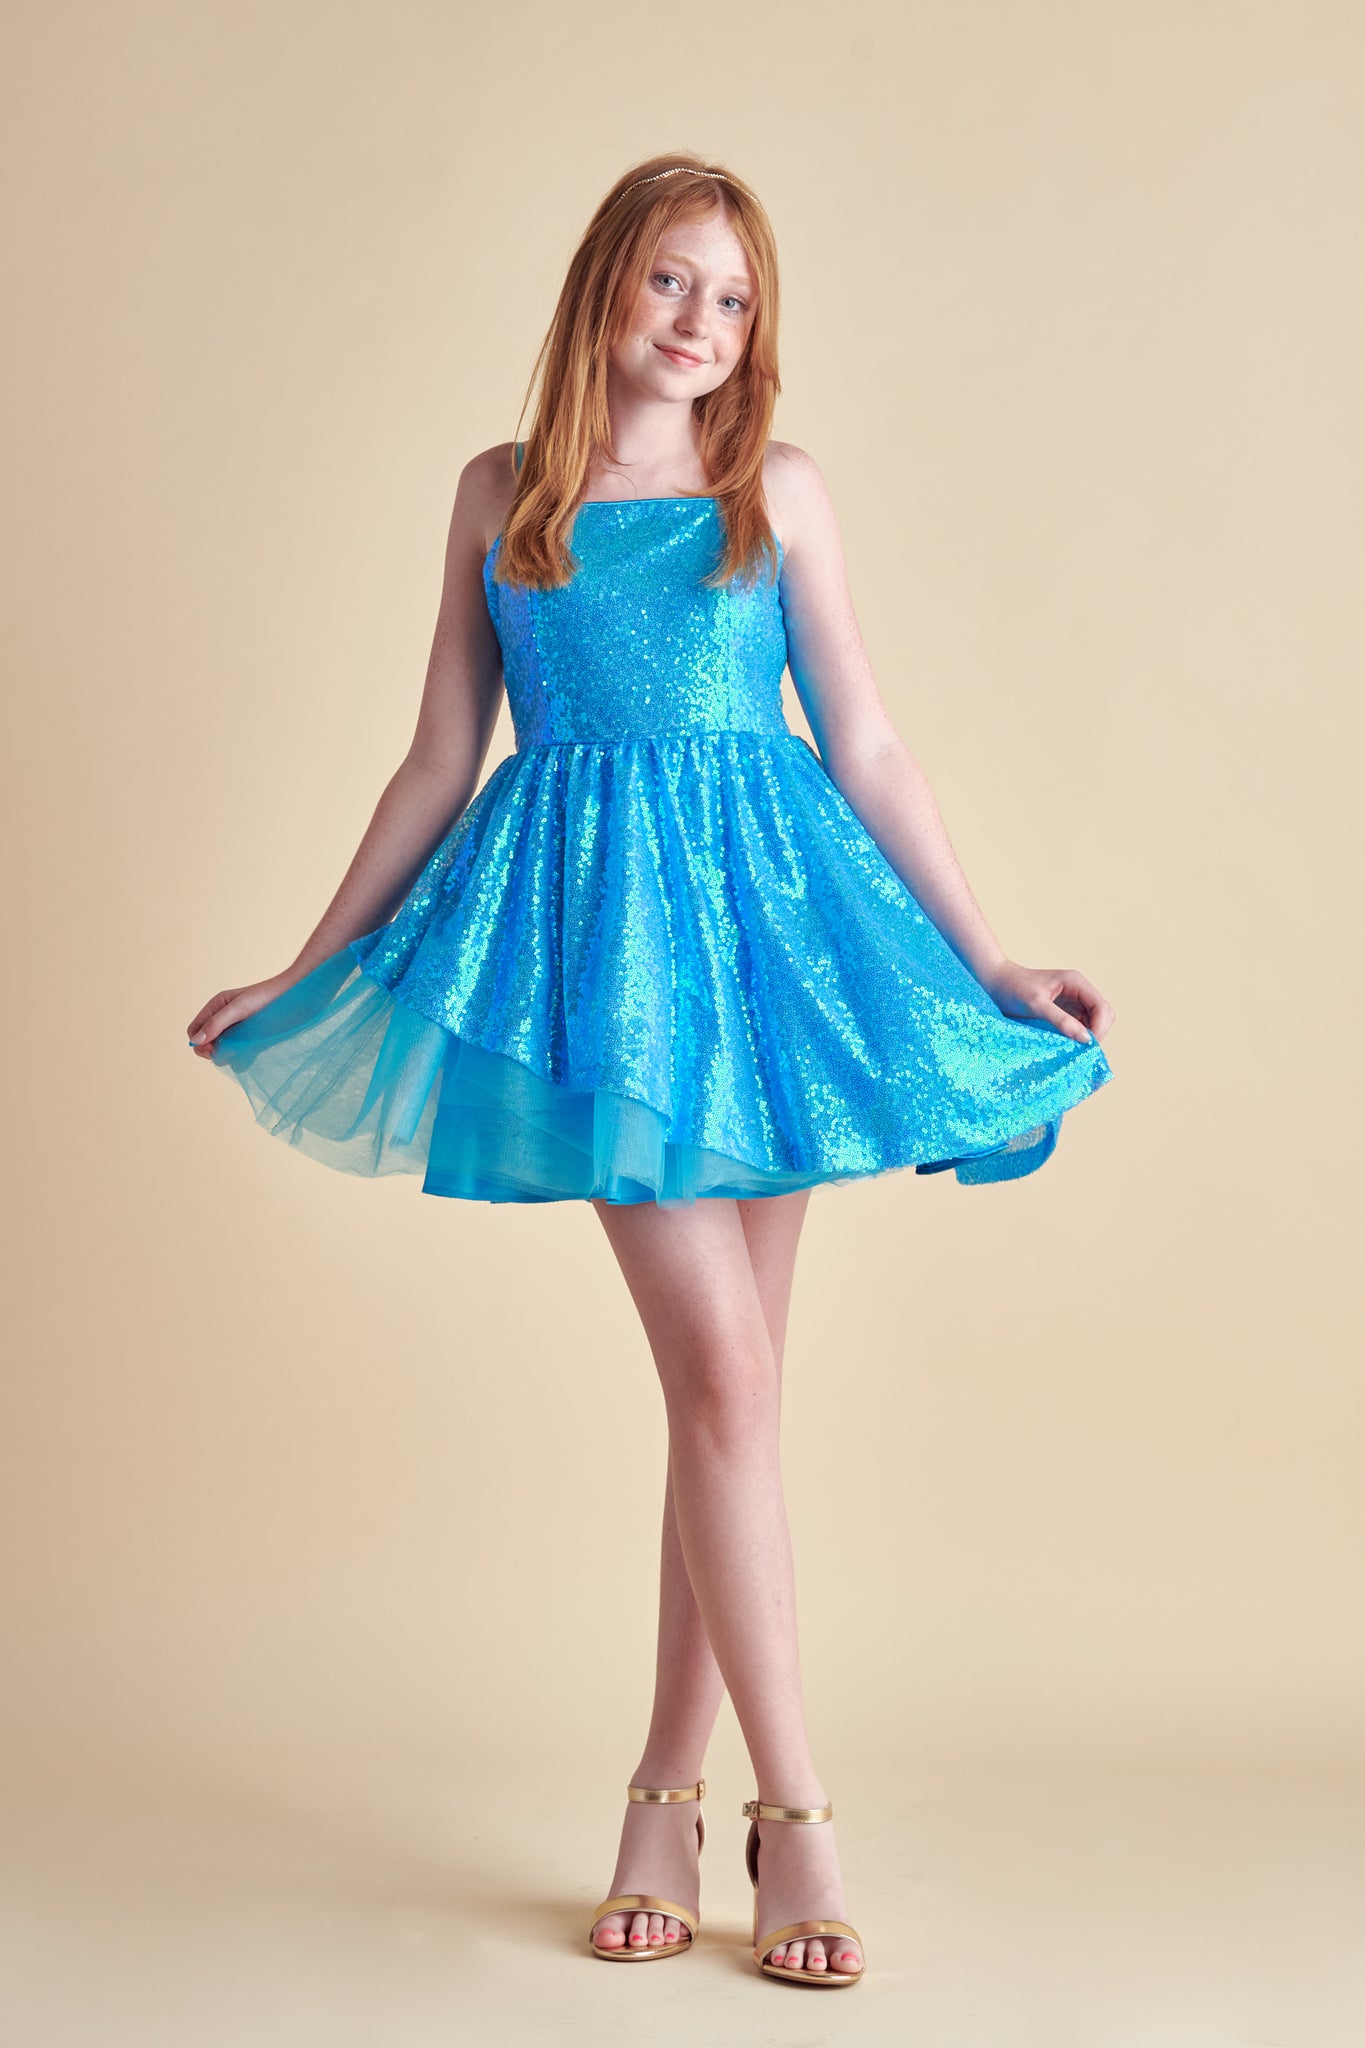 Red head in a turquoise all over sequin dress with full circle skirt.